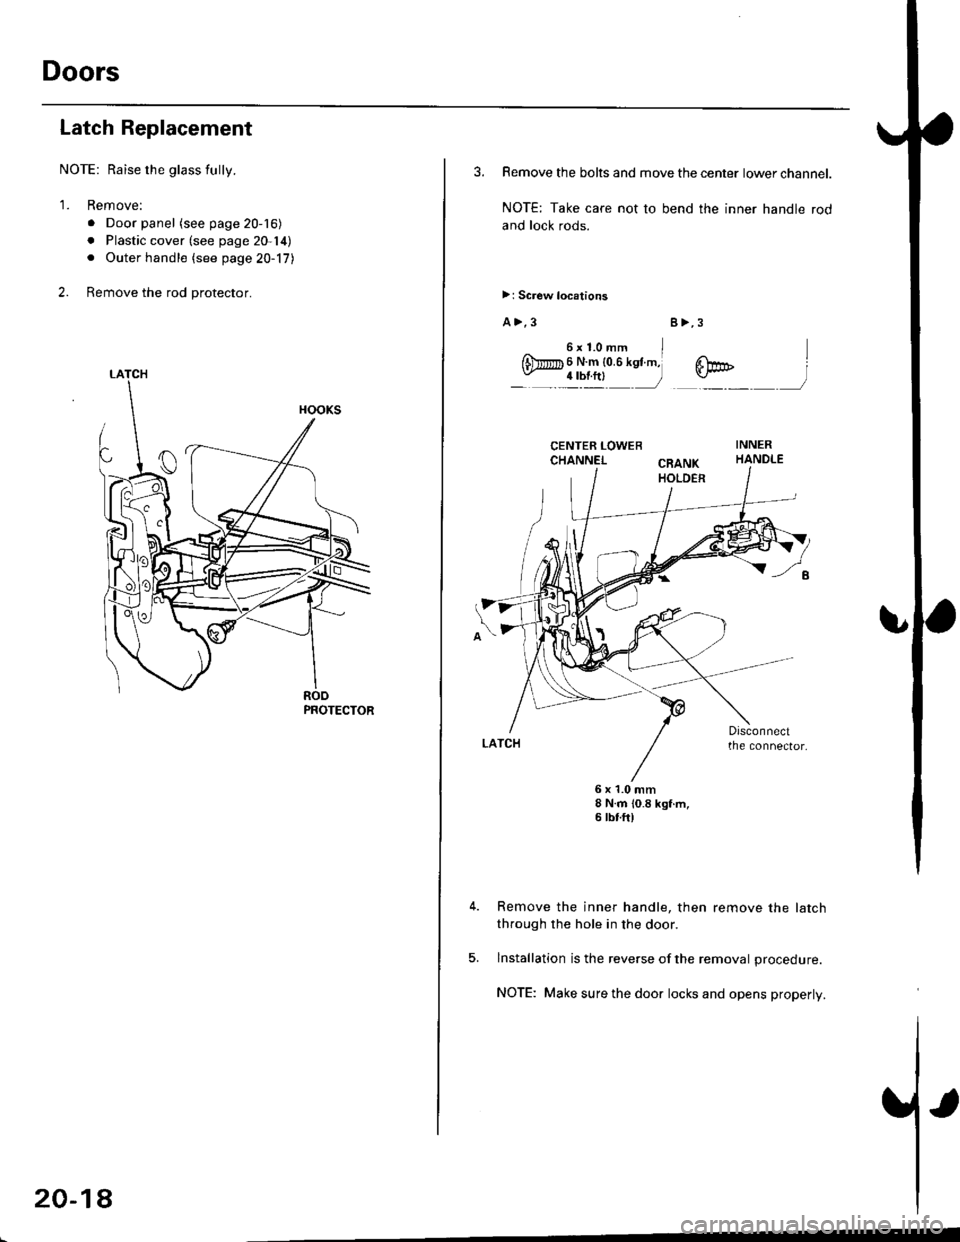 HONDA CIVIC 1997 6.G User Guide Doors
Latch Replacement
NOTE: Raise the glass fully.
1. Remove:
. Door panel (see page 20-16)
. Plastic cover (see page 20-14). Outer handle {see page 20-17}
2. Remove the rod protector.
LATCH
PROTECT